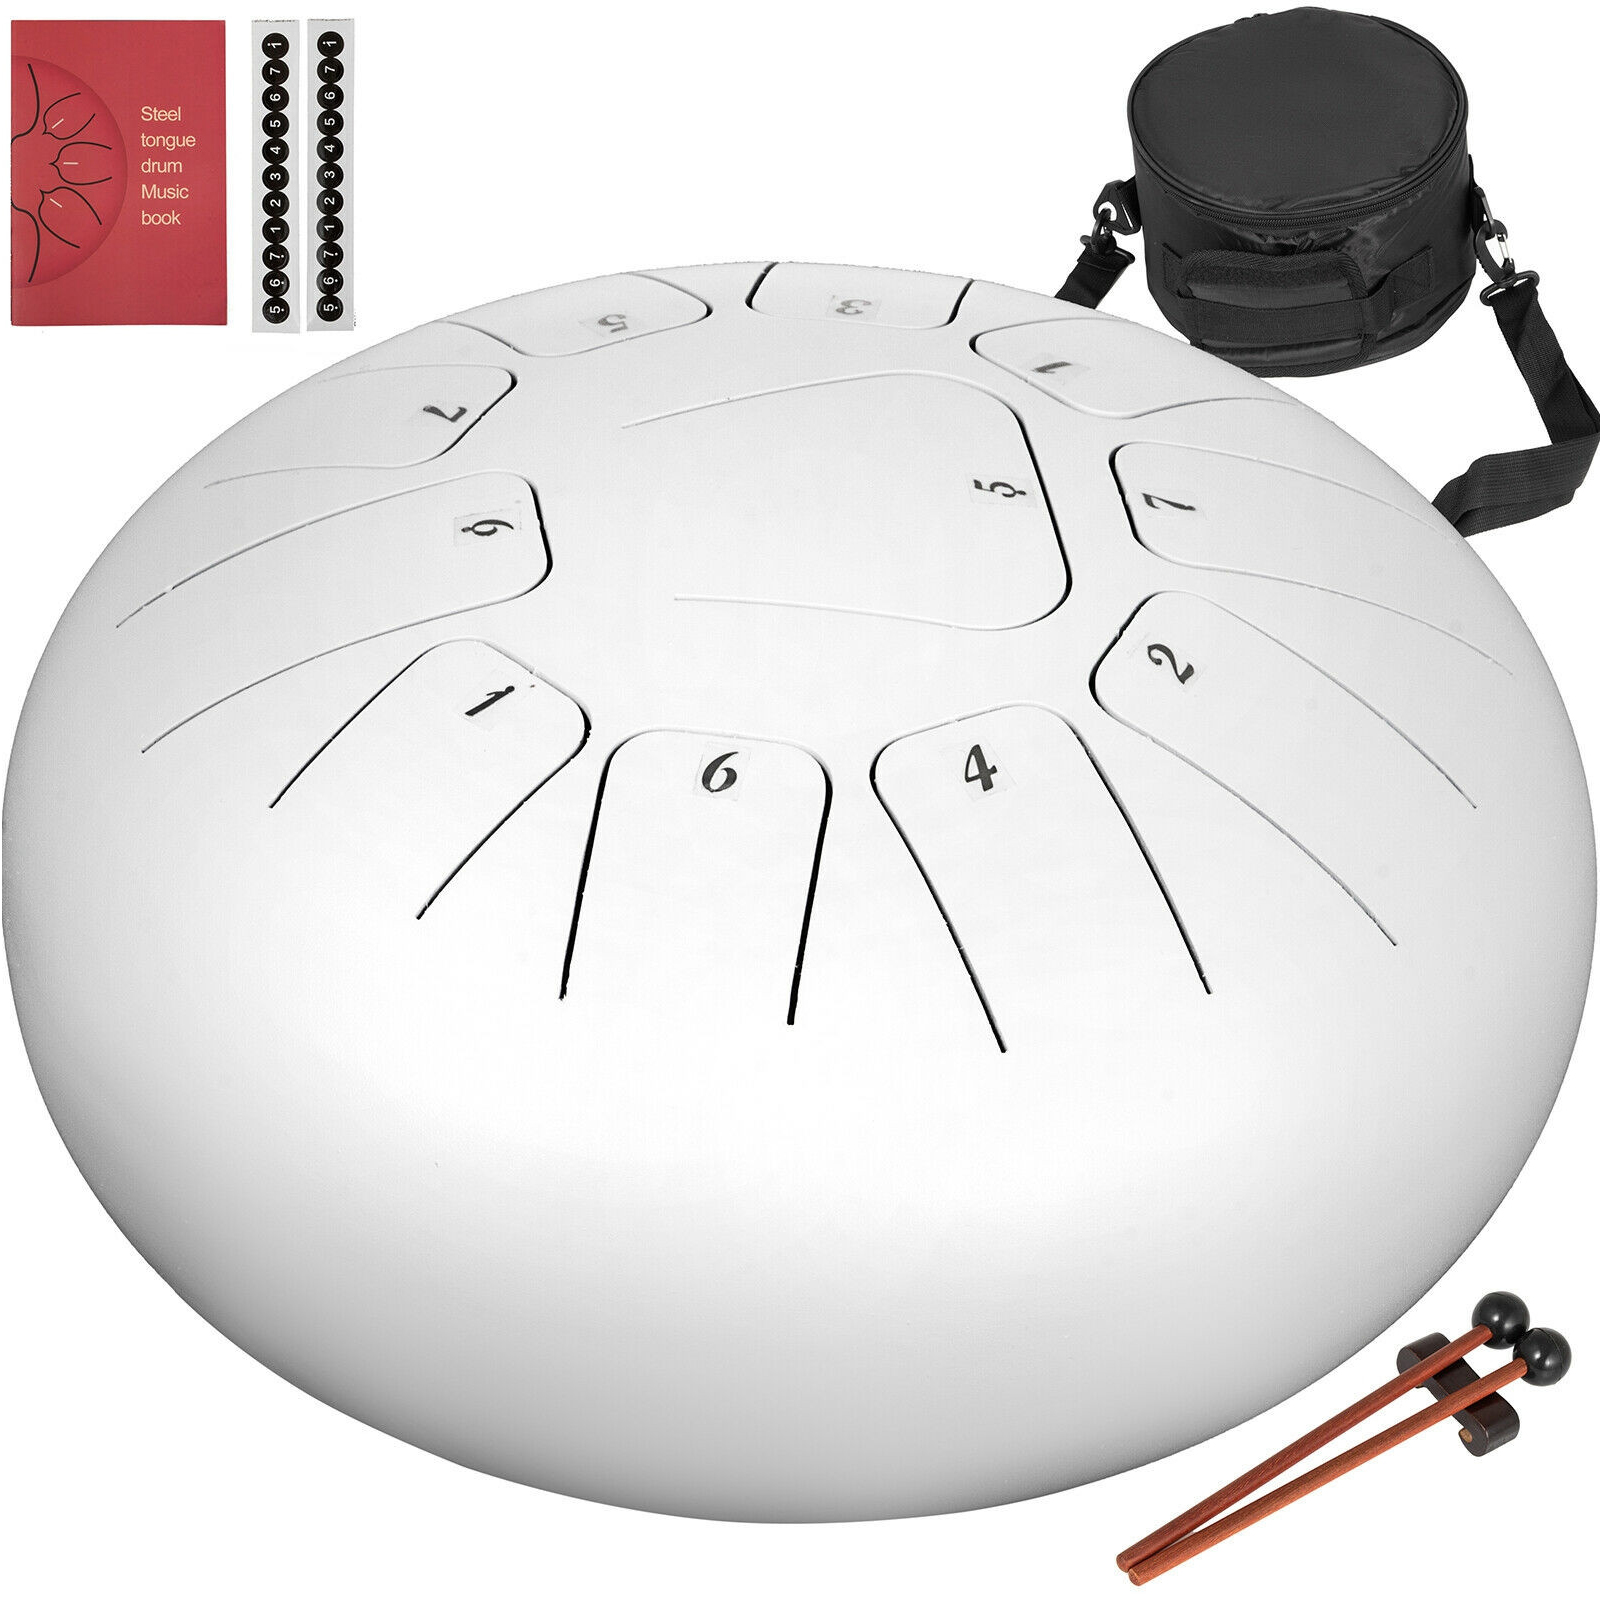 Decompression Entertainment 2 Mallets 11 Notes 10 inch F-Key Handpan Percussion Instrument Tank Chakra Drums with Travel Bag for Meditation Steel Tongue Drum Music and Gift